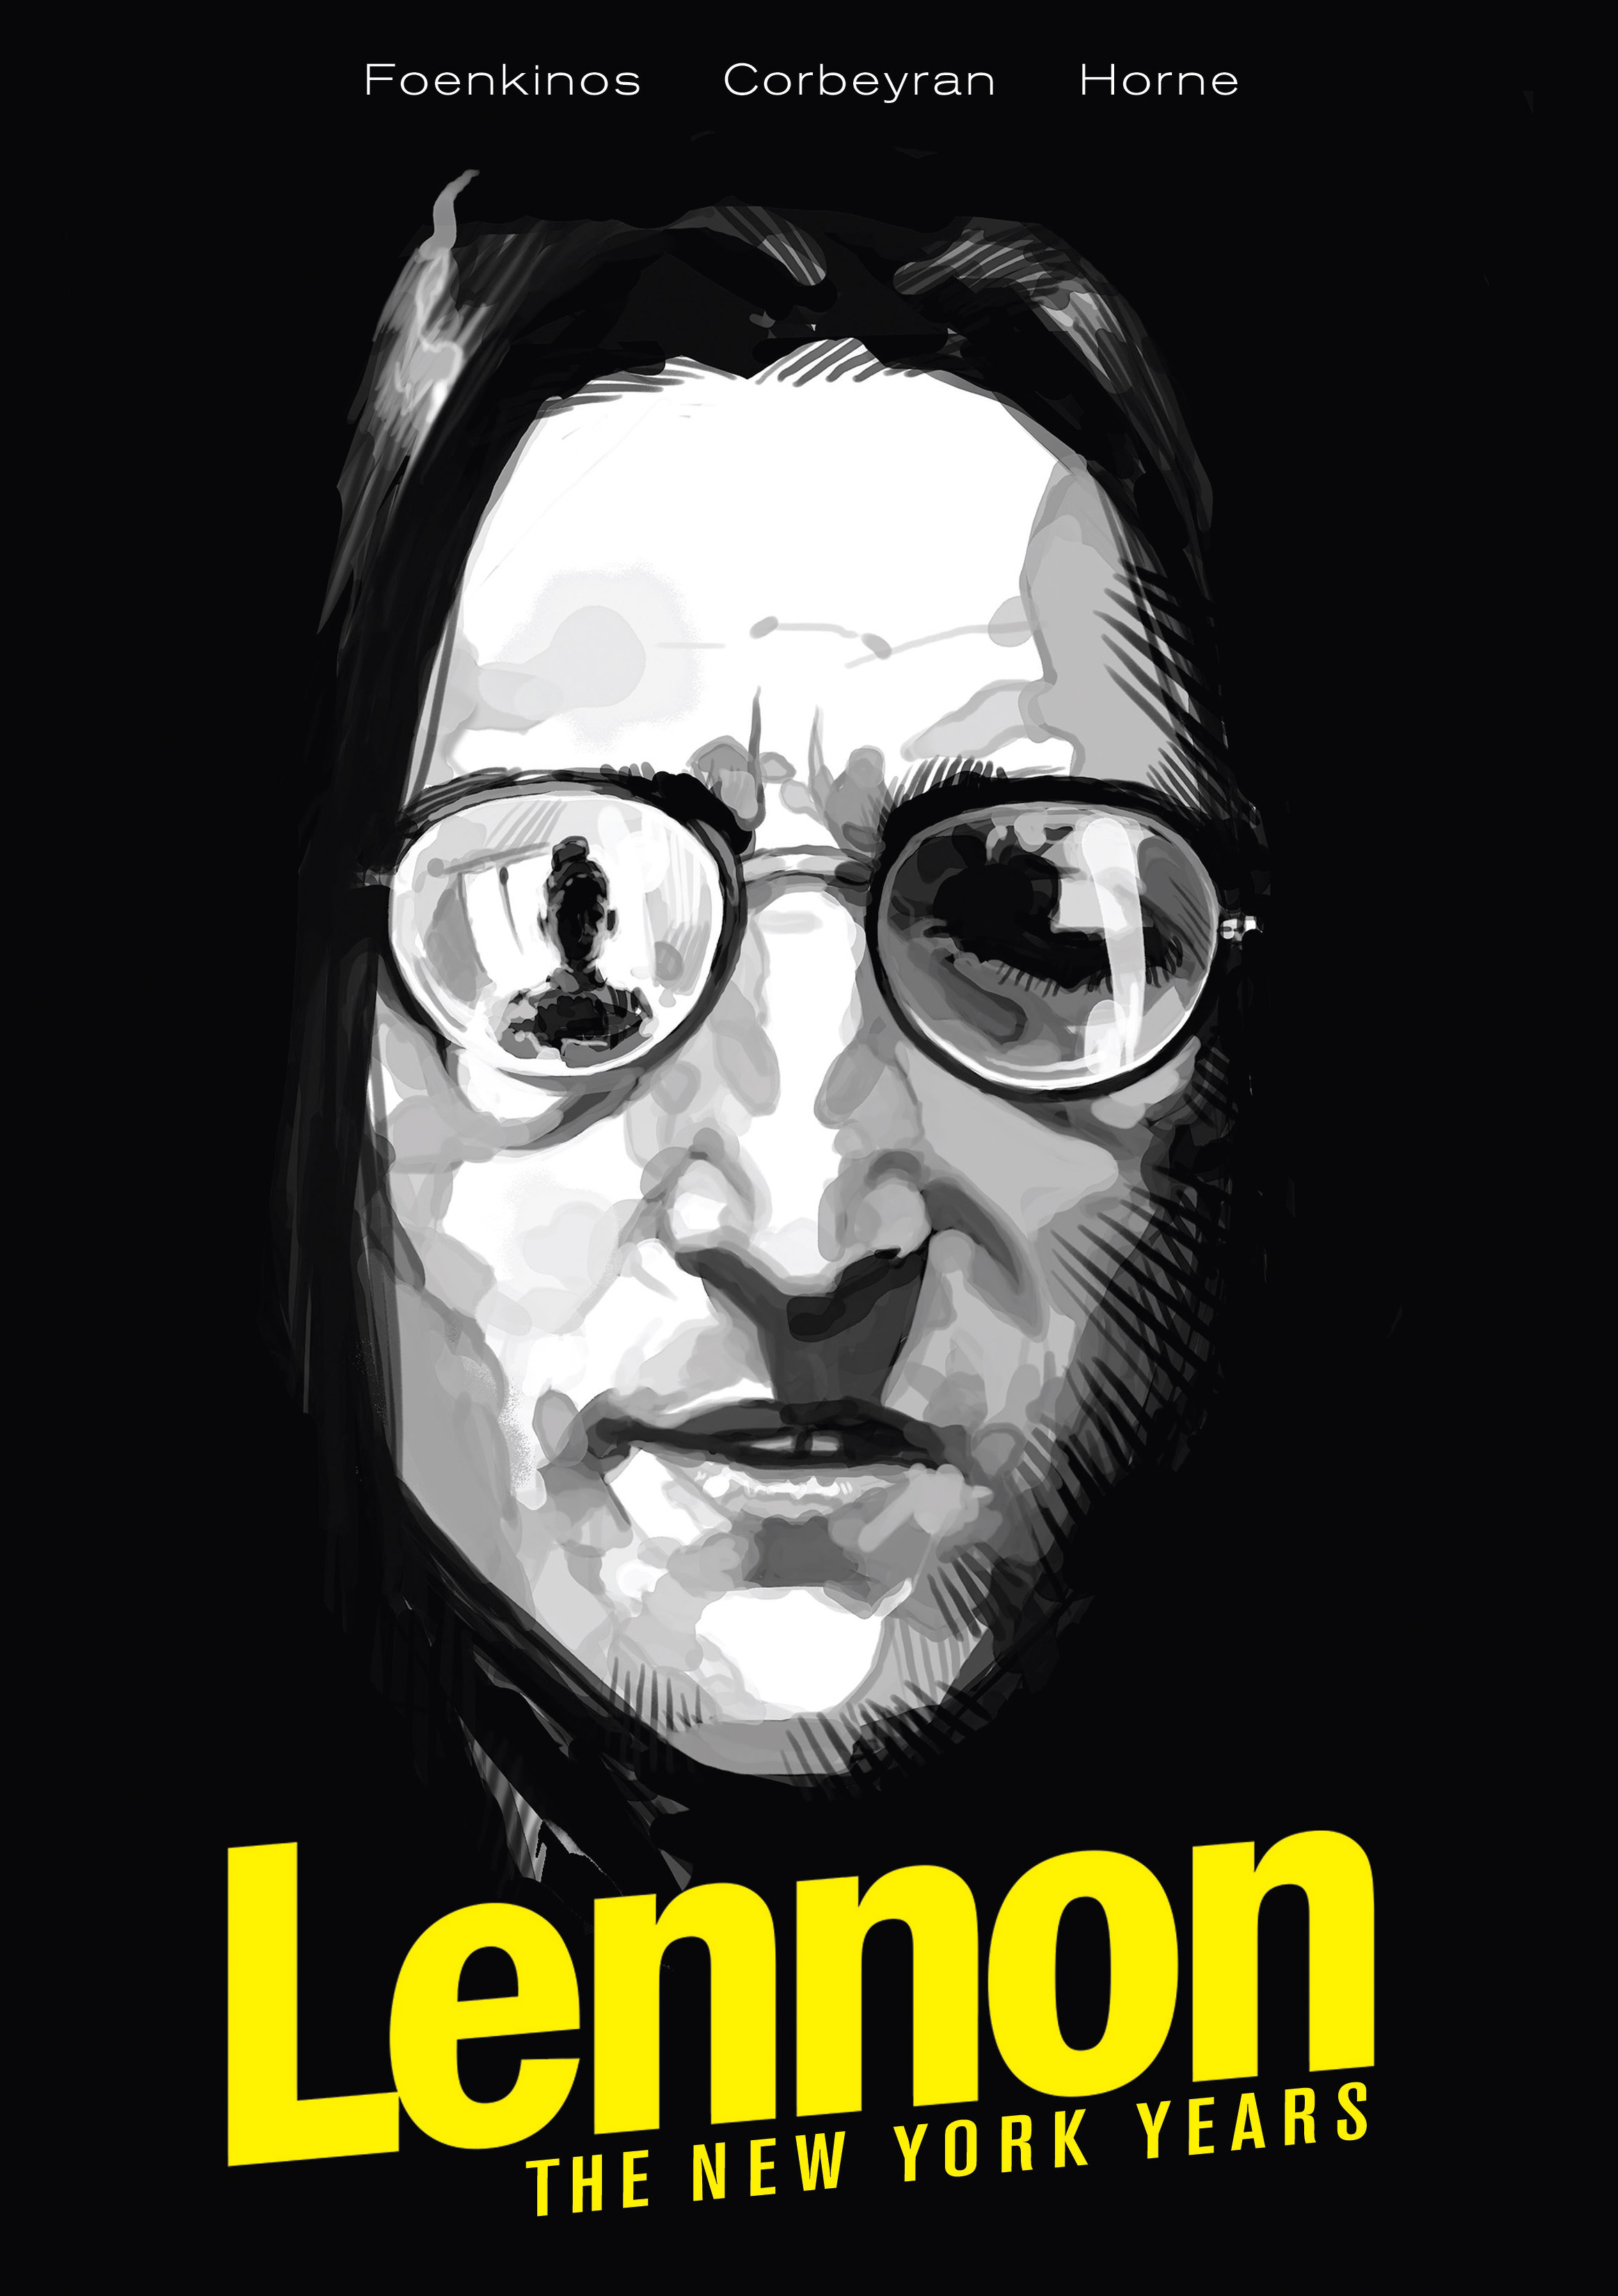 Read online Lennon: The New York Years comic -  Issue # TPB (Part 1) - 1